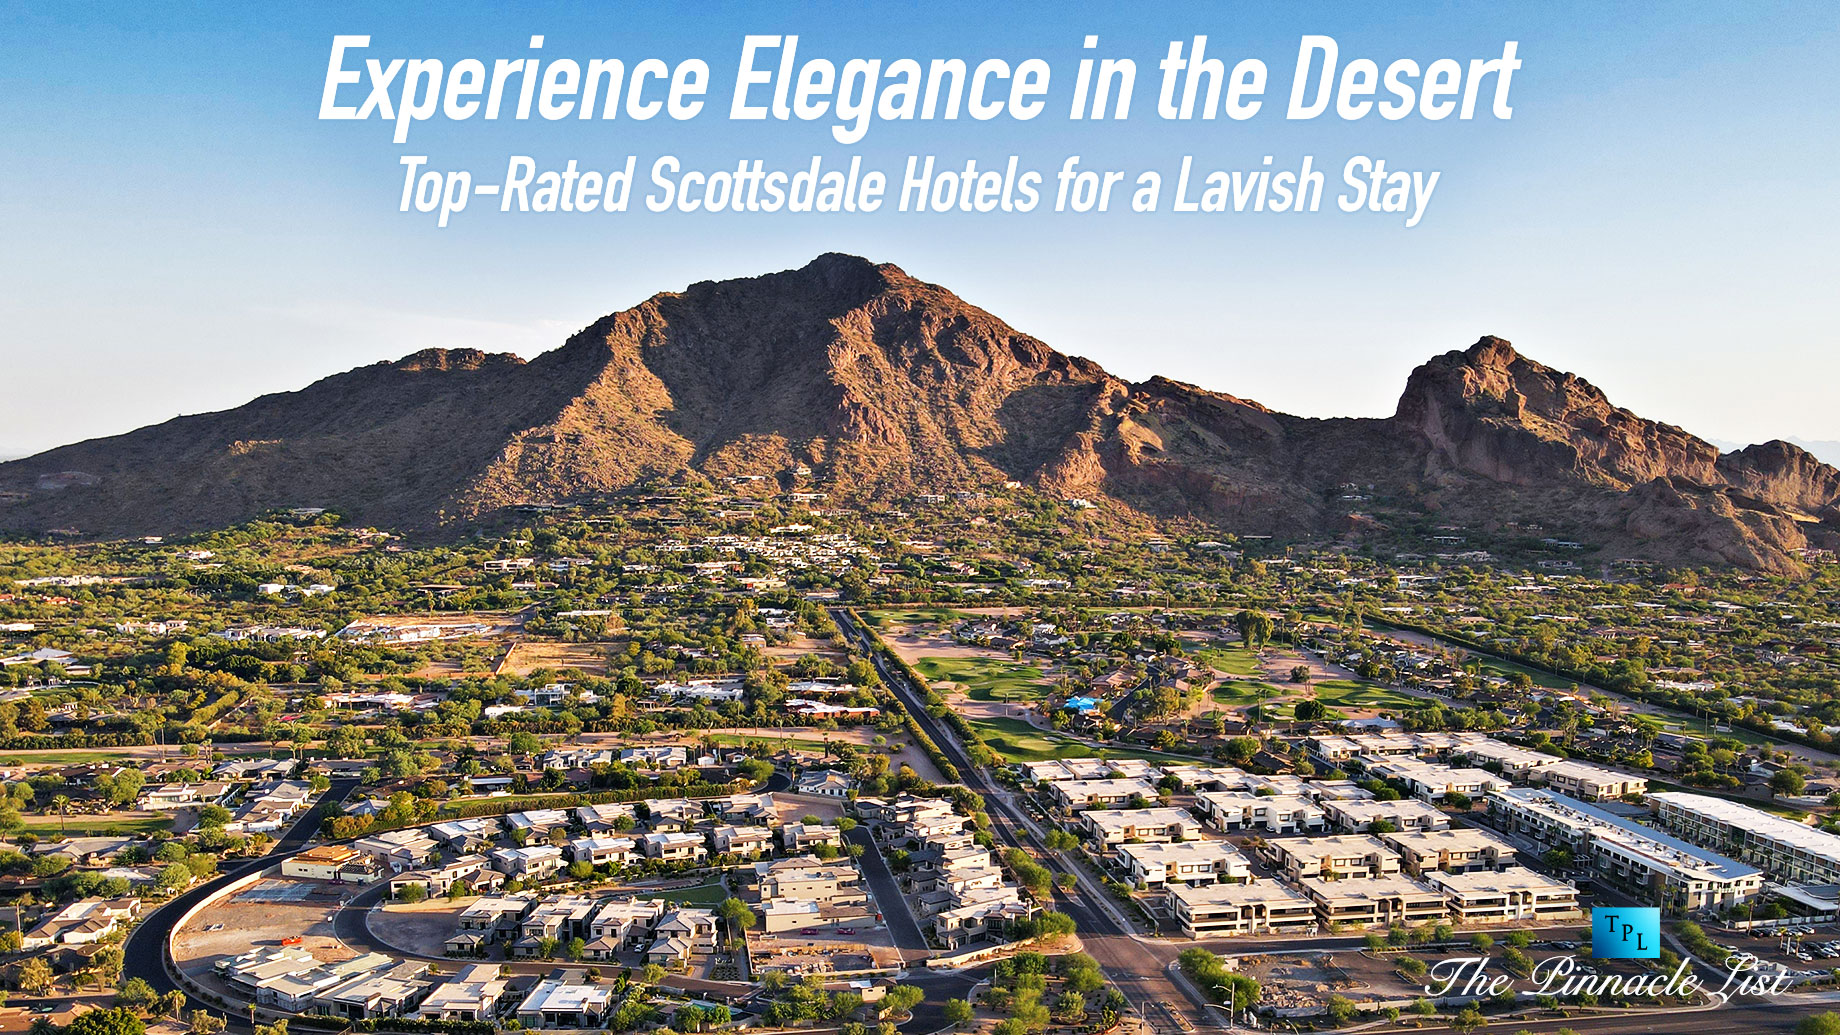 Experience Elegance in the Desert: Top-Rated Scottsdale Hotels for a Lavish Stay